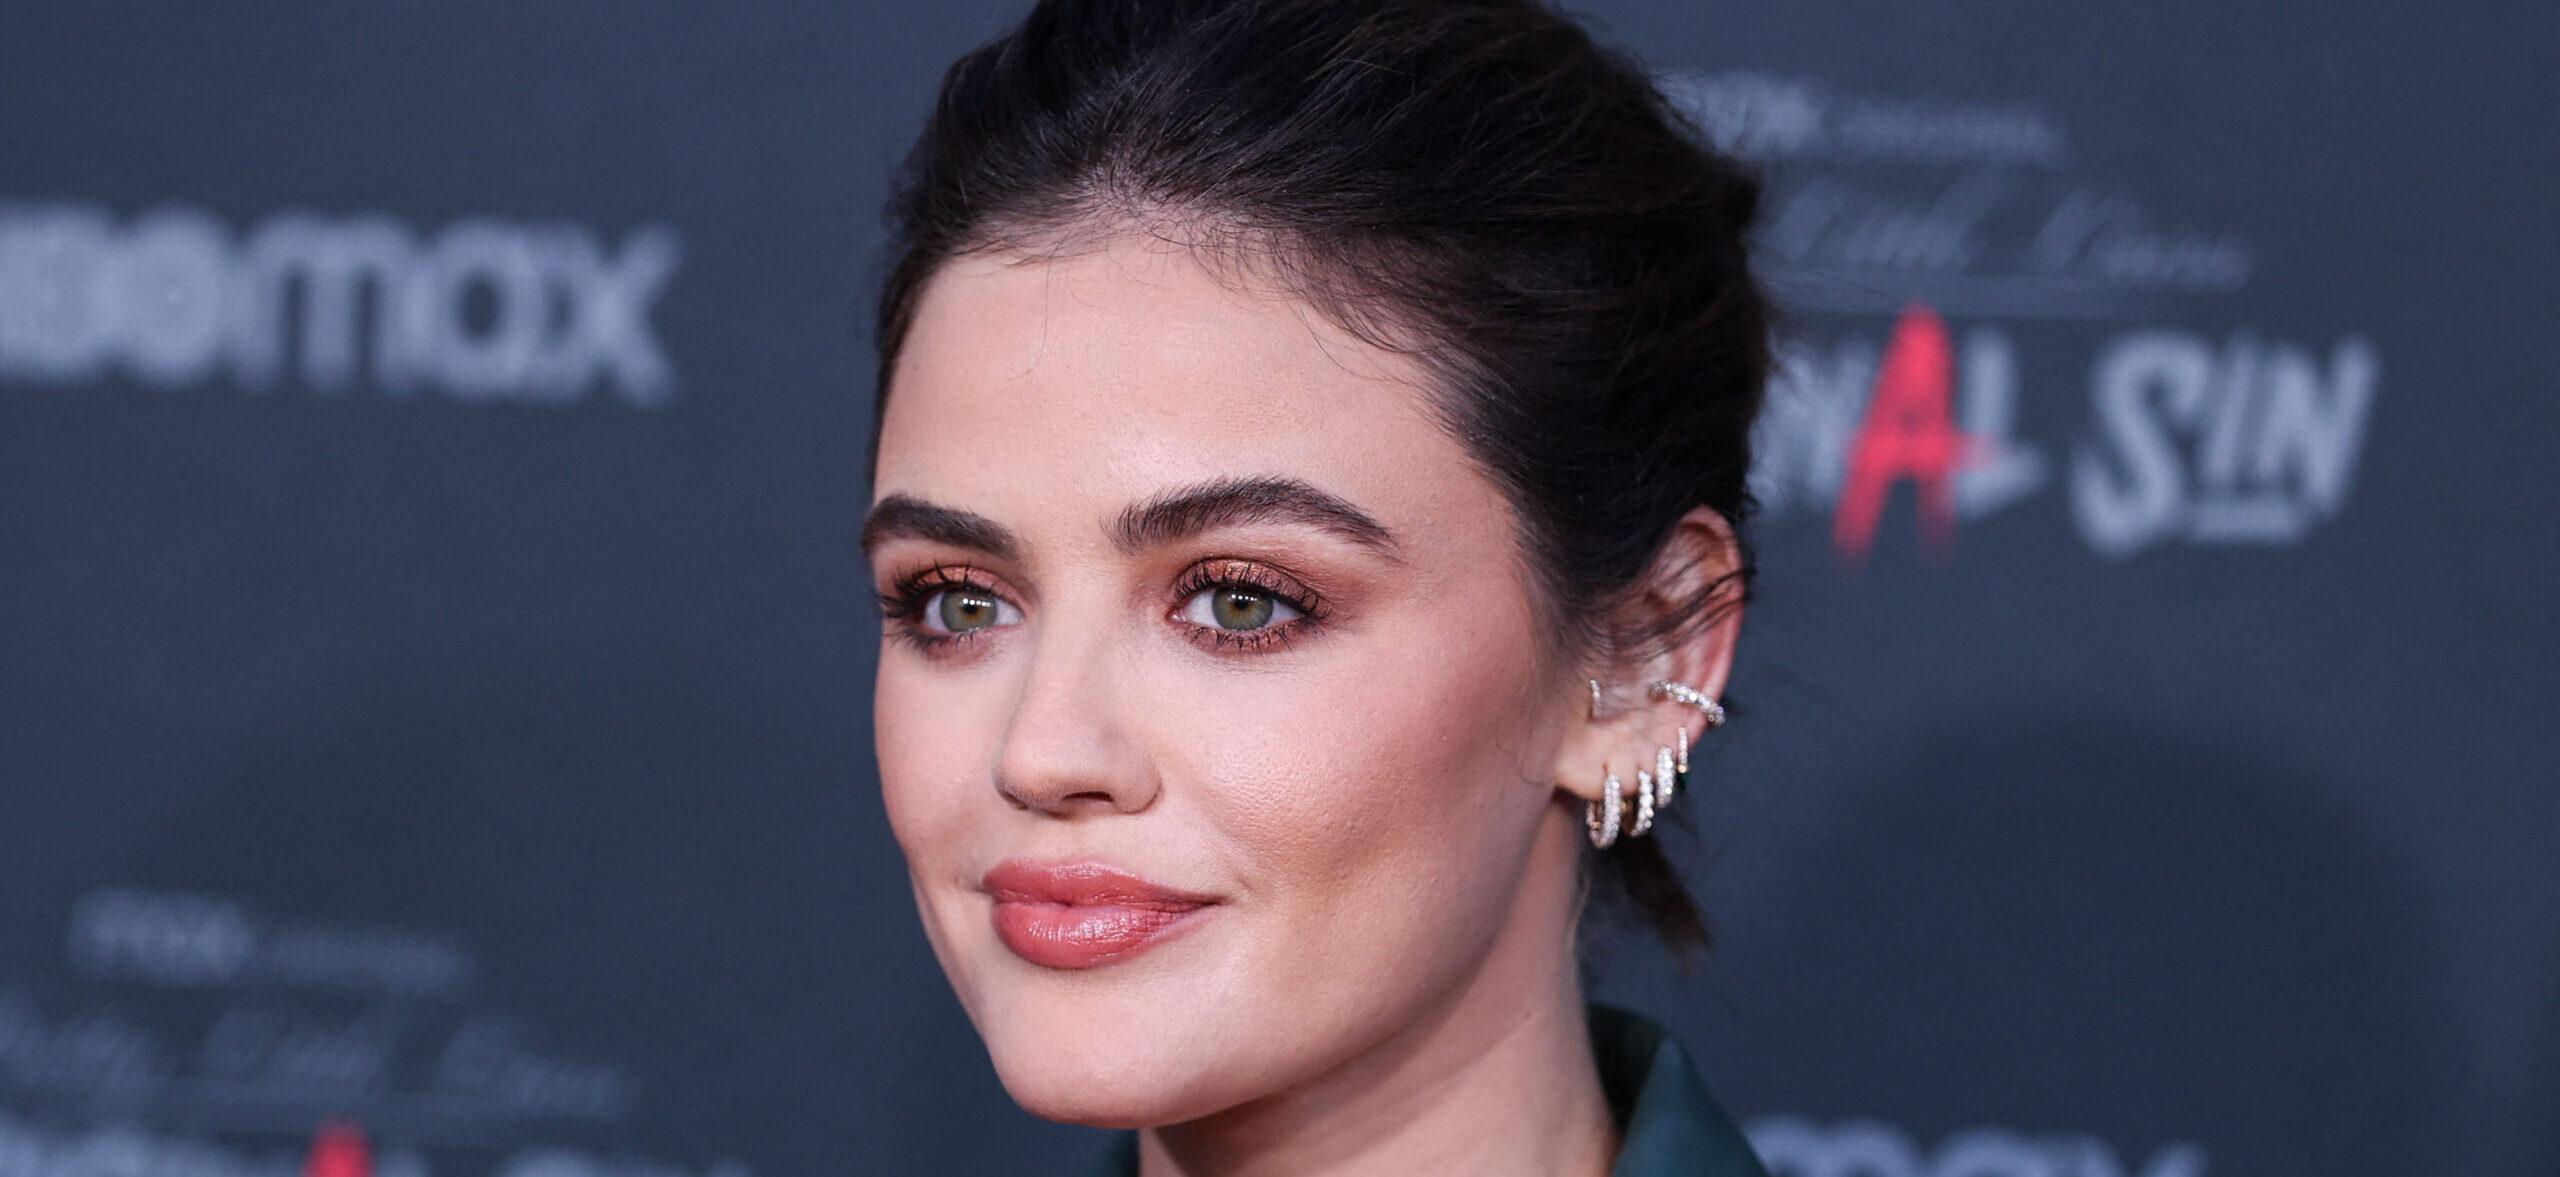 Lucy Hale Talks About Her Alcohol Addiction: ‘My Drinking Was Never Normal’